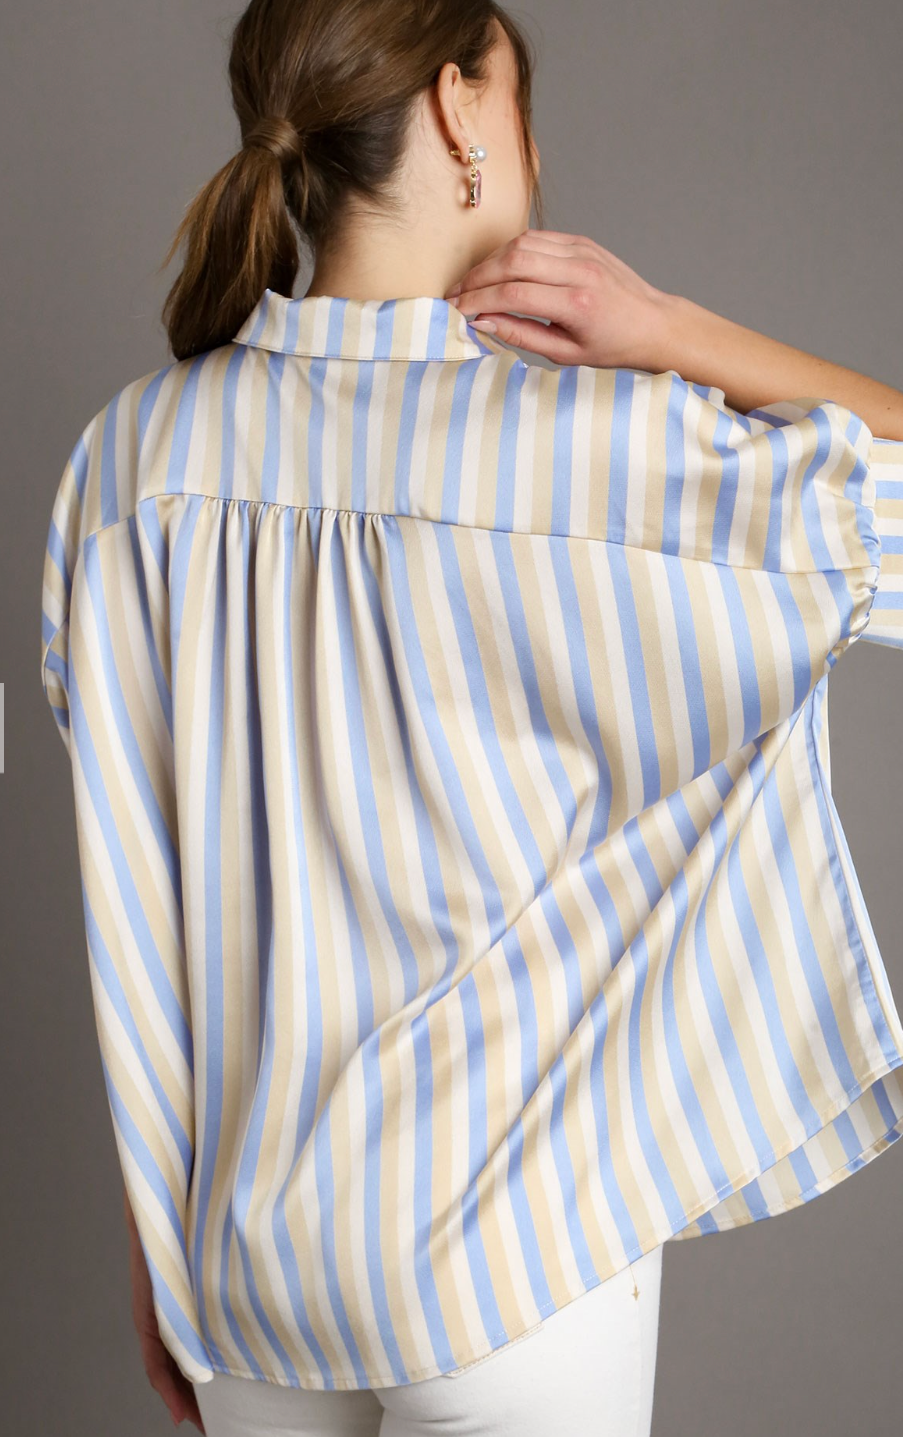 You're Safe With Me Striped Blouse